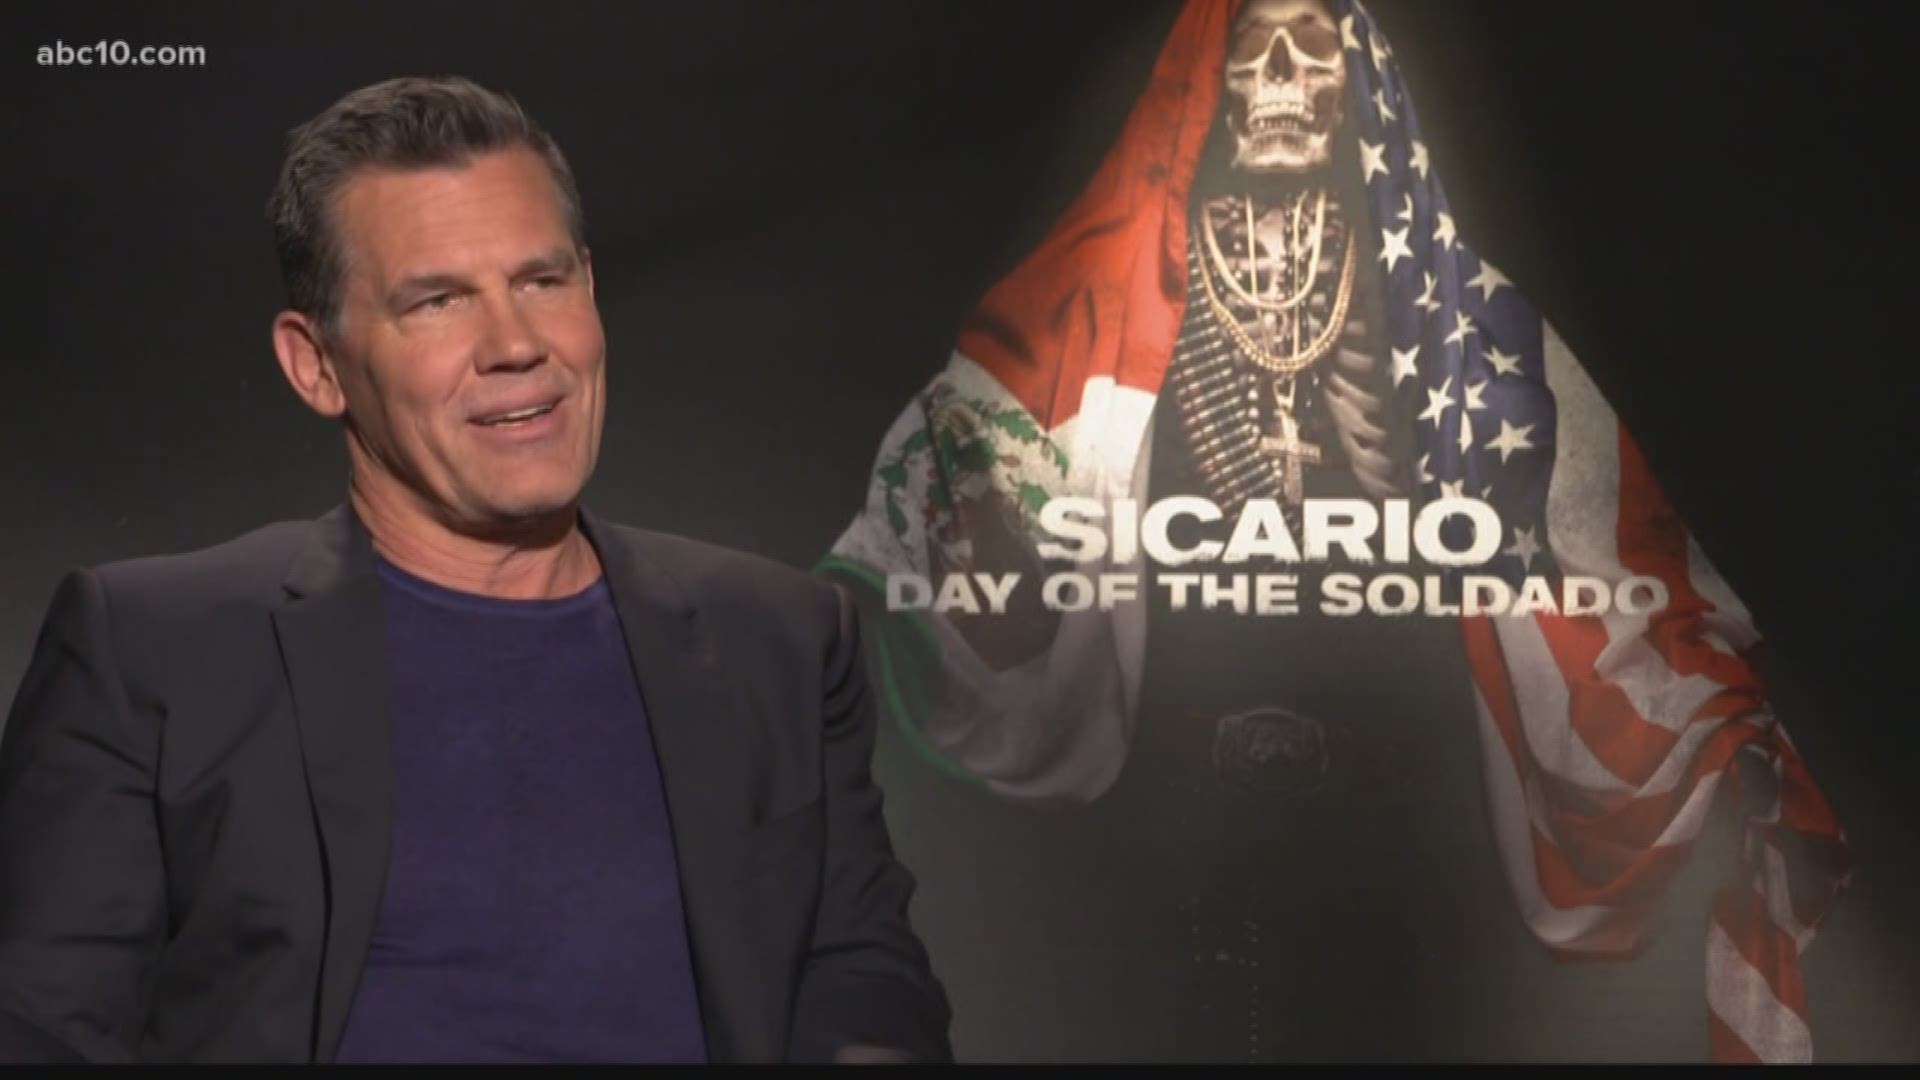 Mark S. Allen sat down with Josh Brolin to talk about the industry and the most anticipated sequel of the summer.